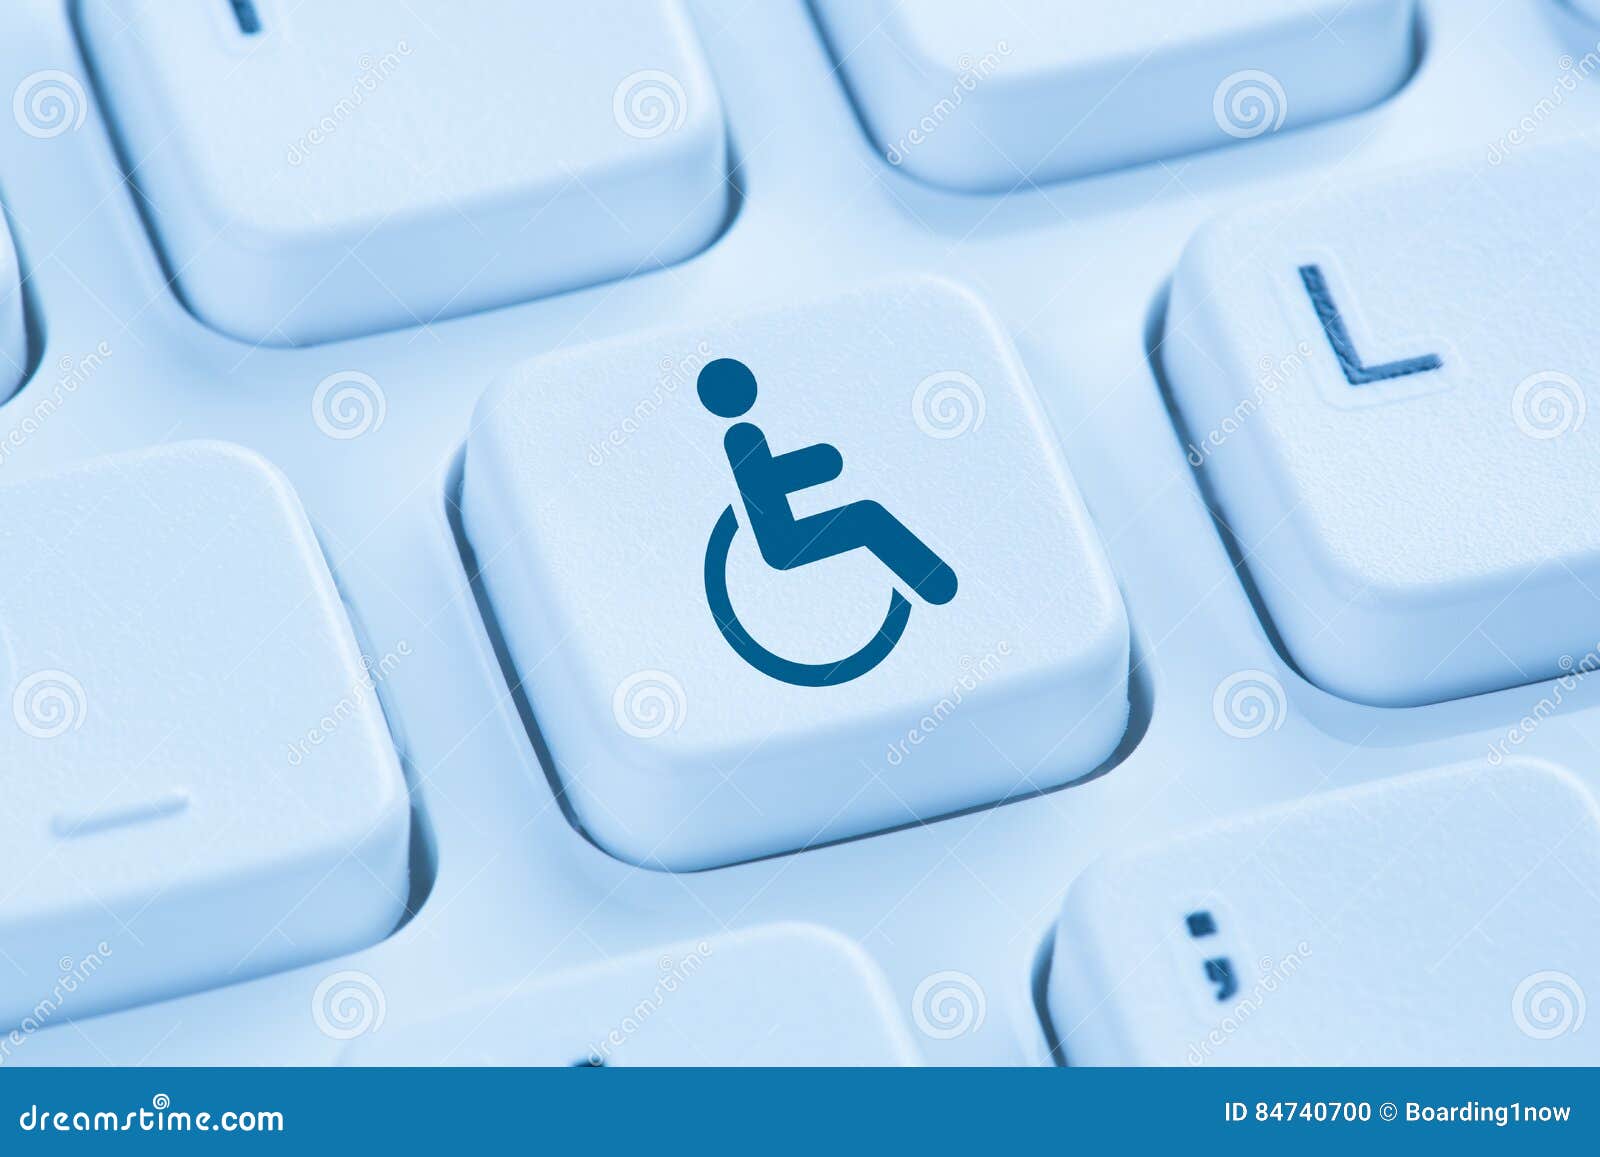 web accessibility online internet website computer for people wi